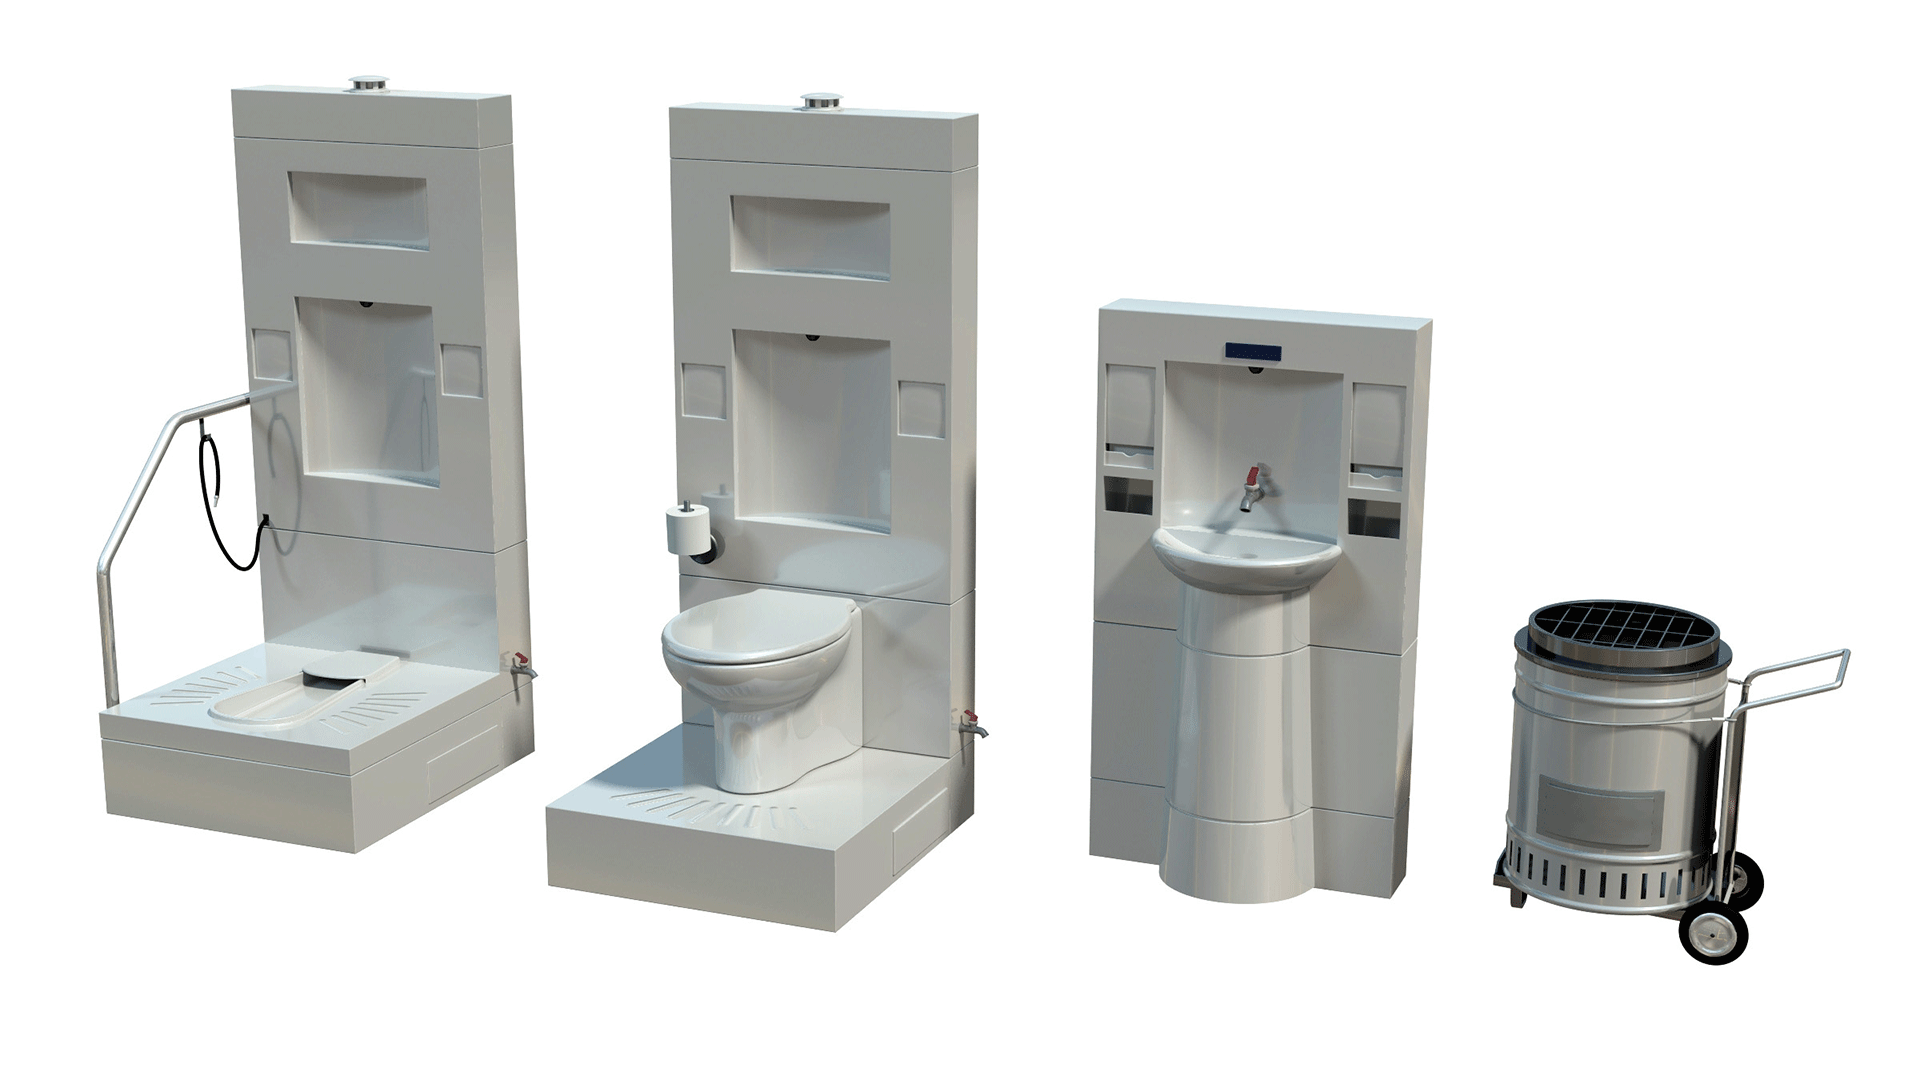 image: computer renderings of 2 toilets, 1 sink, and a burner